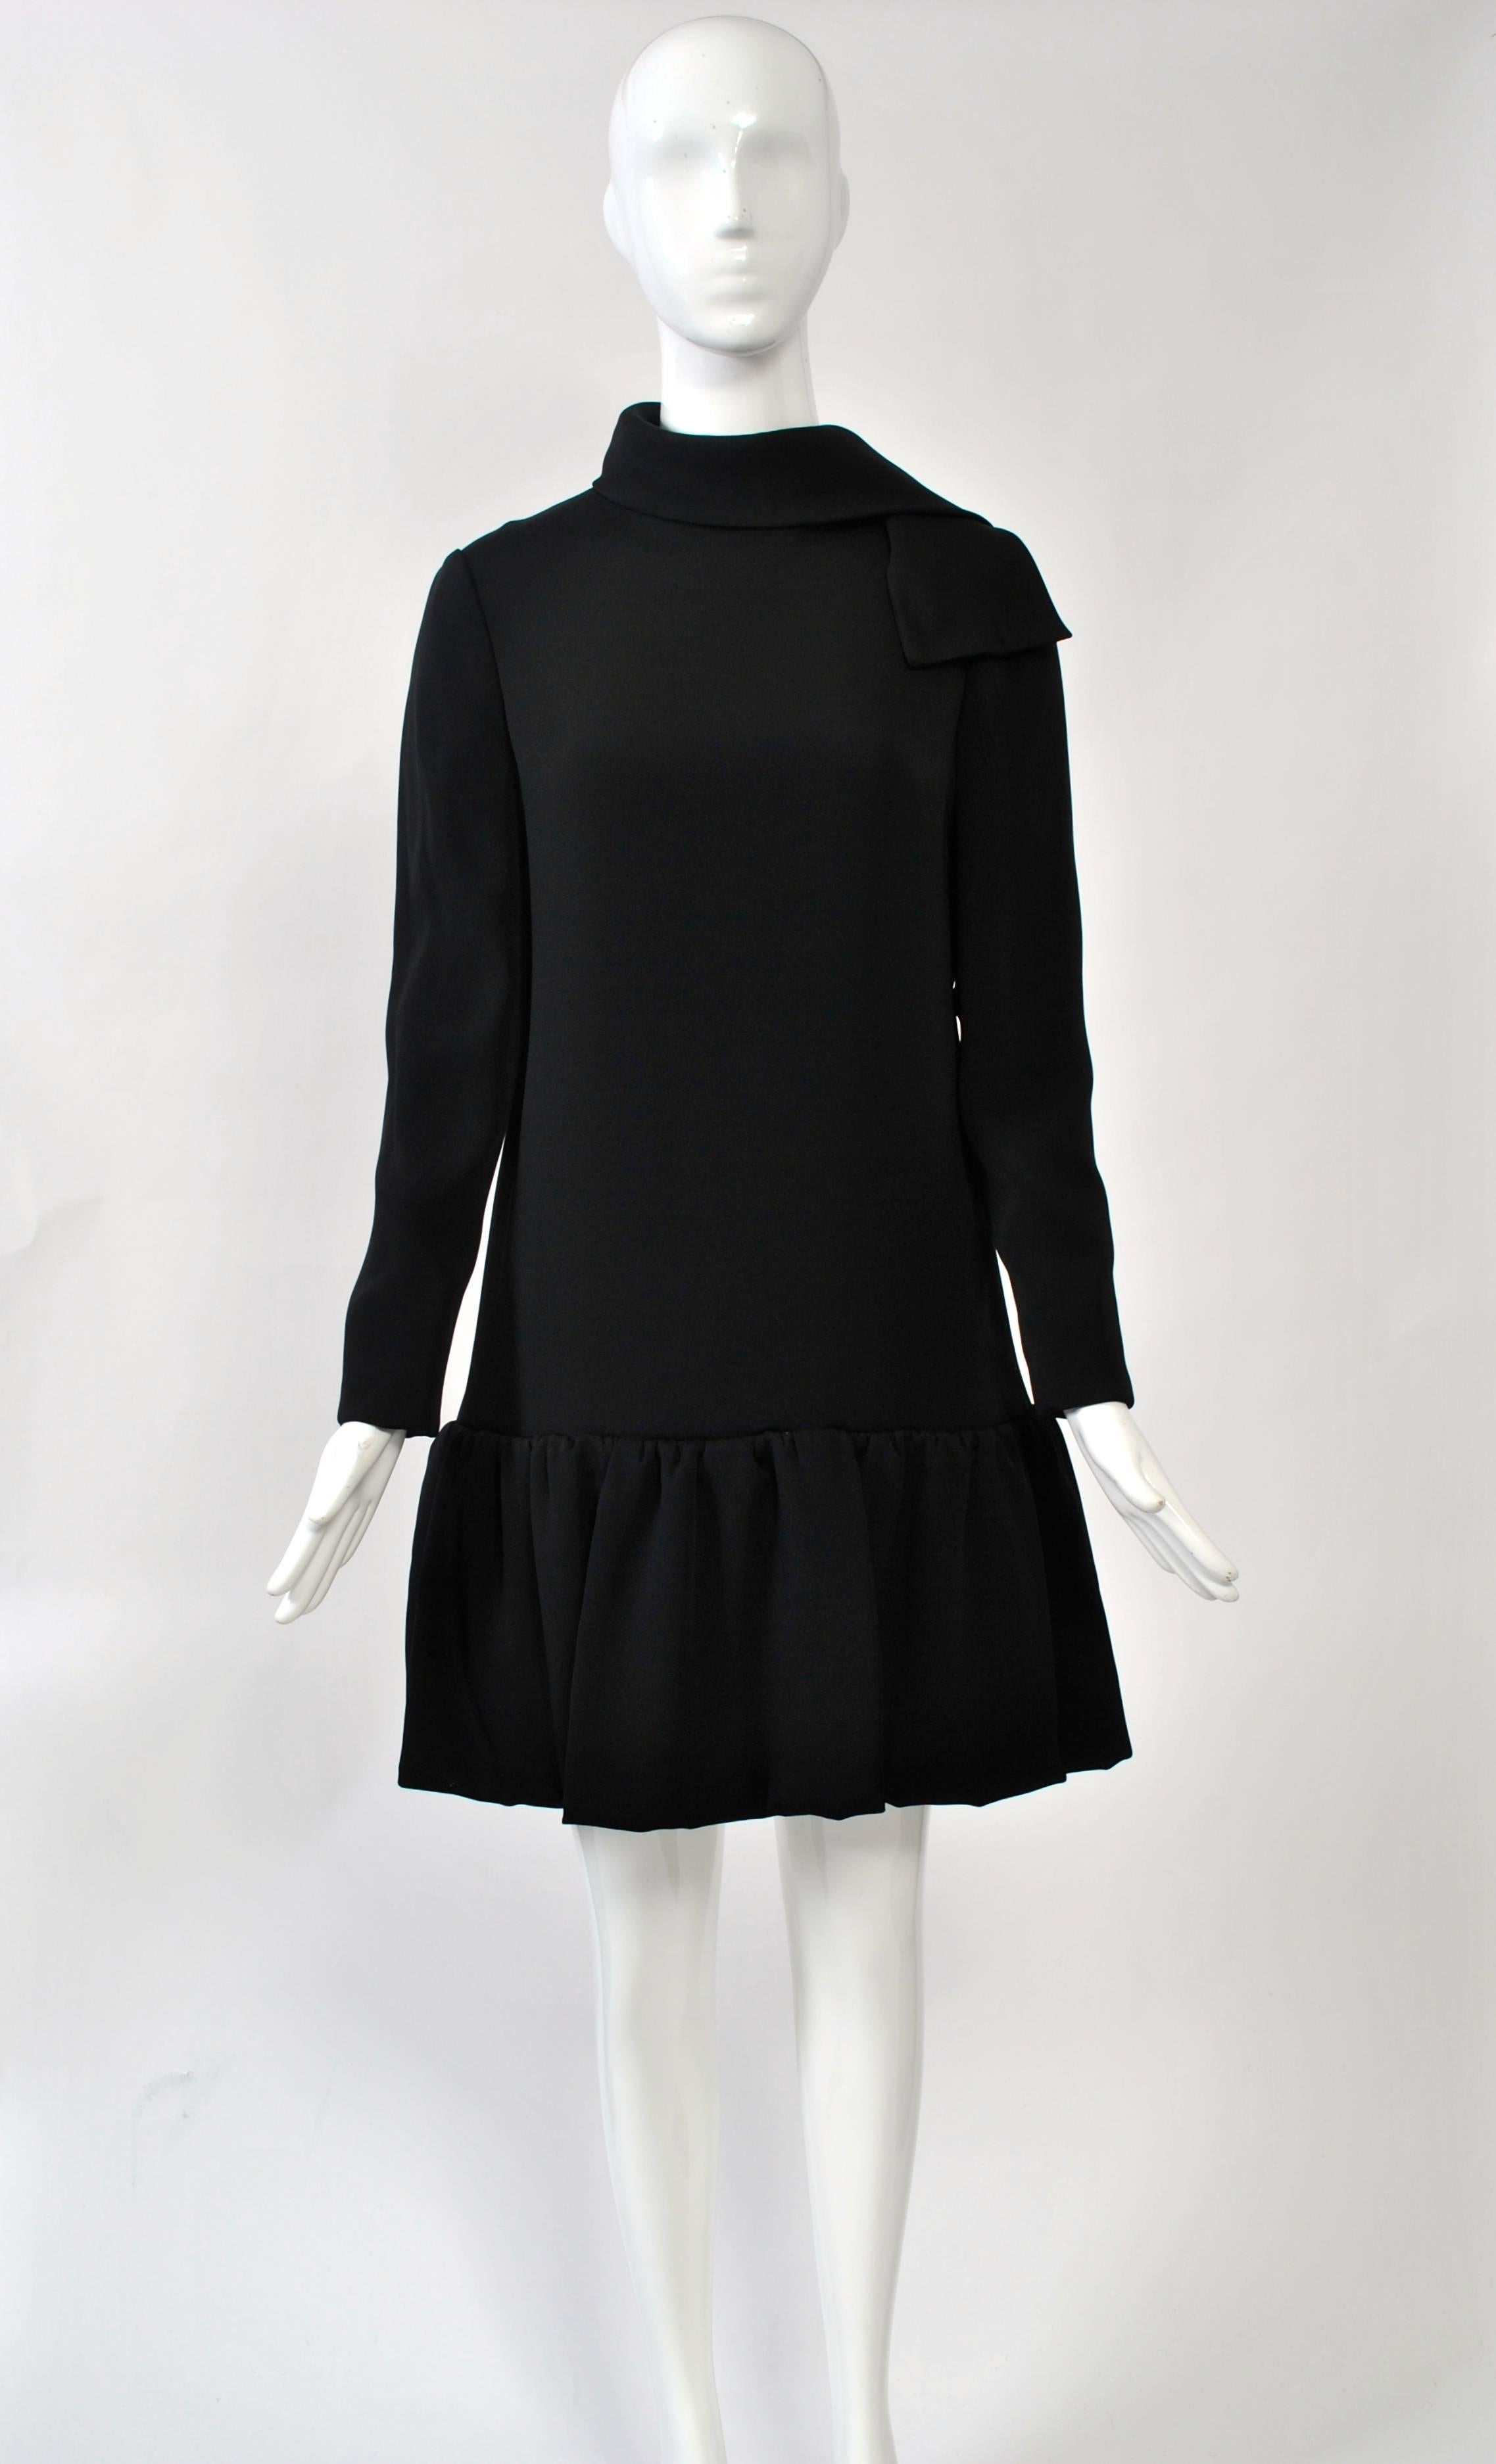 1960s Pierre Cardin LBD in heavy black crepe featuring a narrow silhouette with dropped waist and a uniquely designed skirt made of looped and shirred panels. Long sleeves and a long neck tie complete the look. Back zipper. Fully lined. Approximate